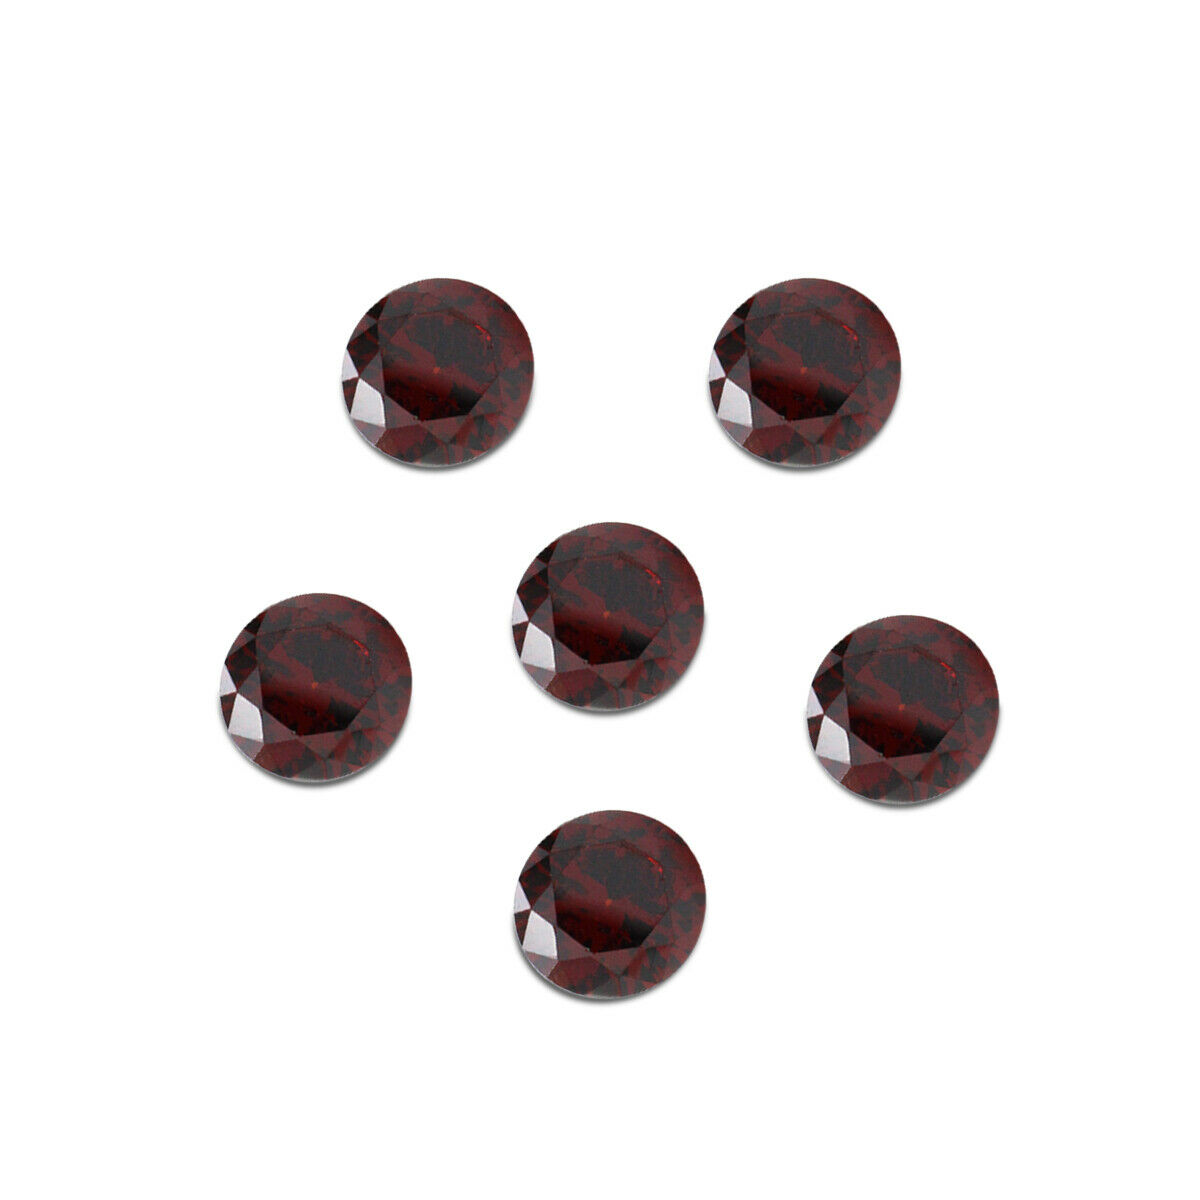 6 Cognac Red Natural Diamond Loose Faceted Rounds 1.3mm 6pcs Lot